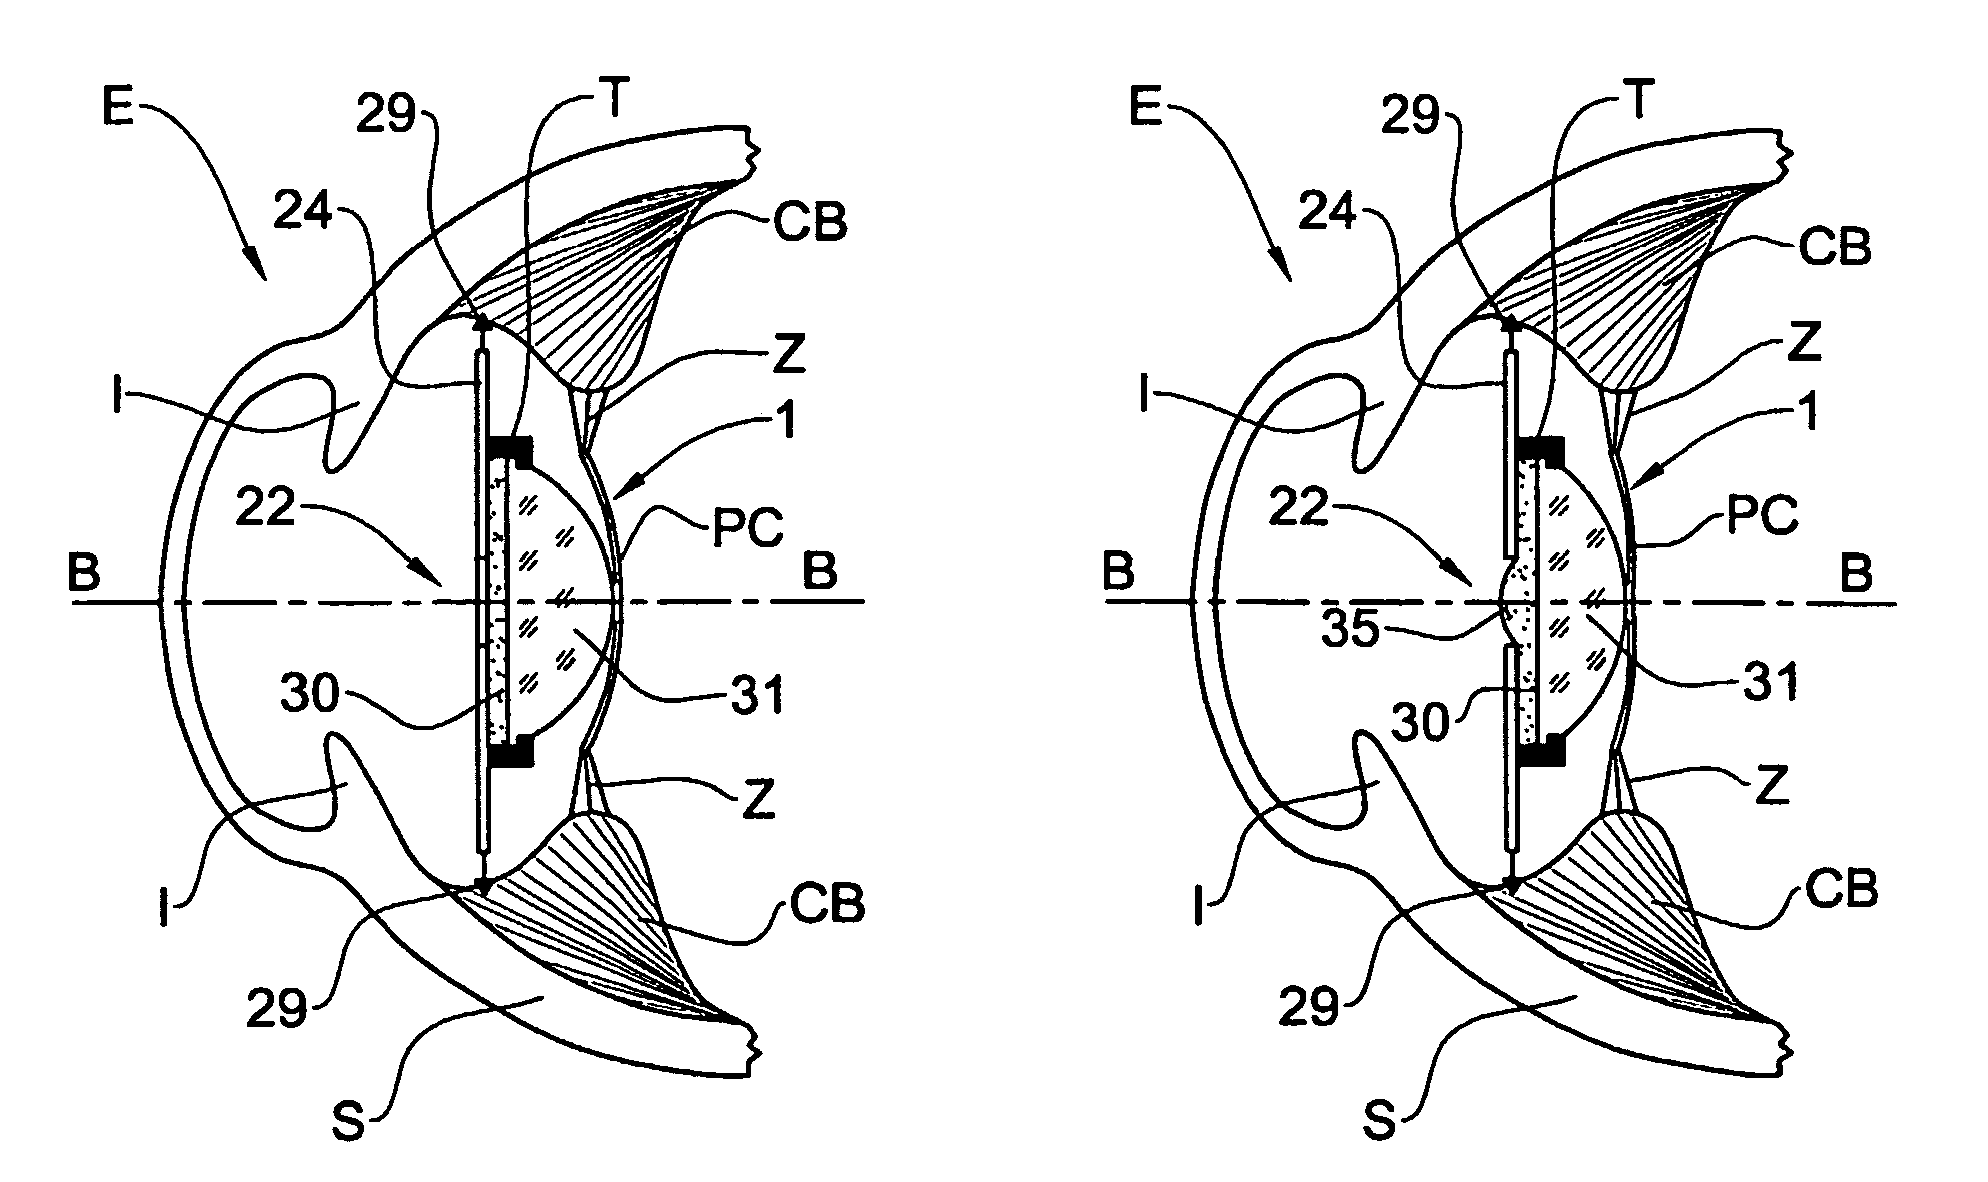 Accommodating lens assembly